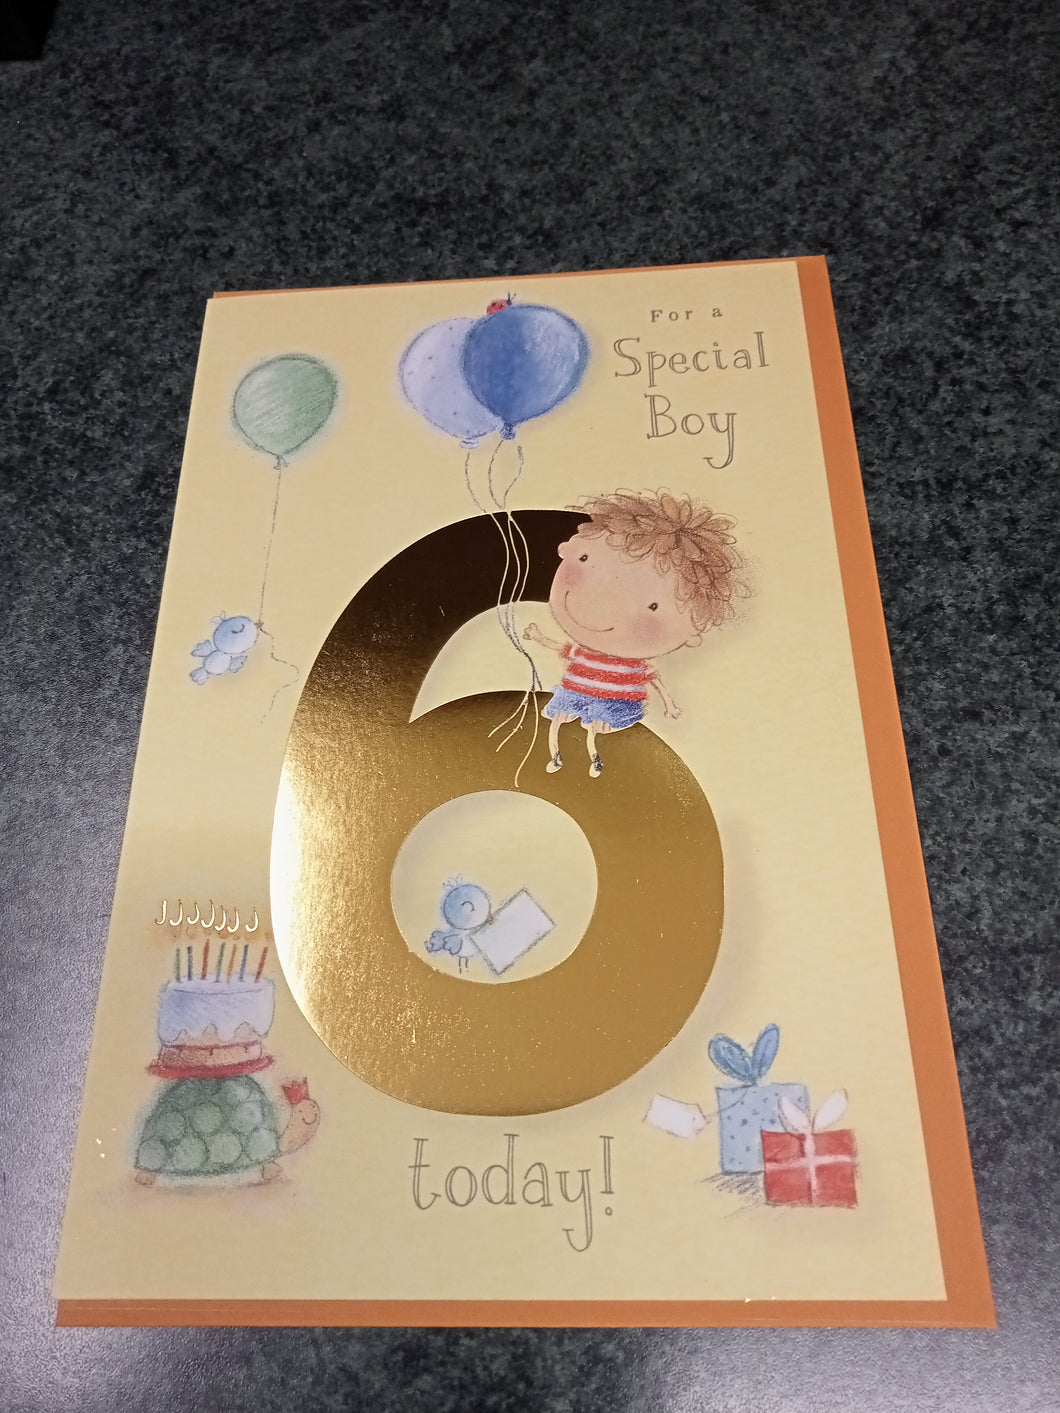 For a special boy 6 today